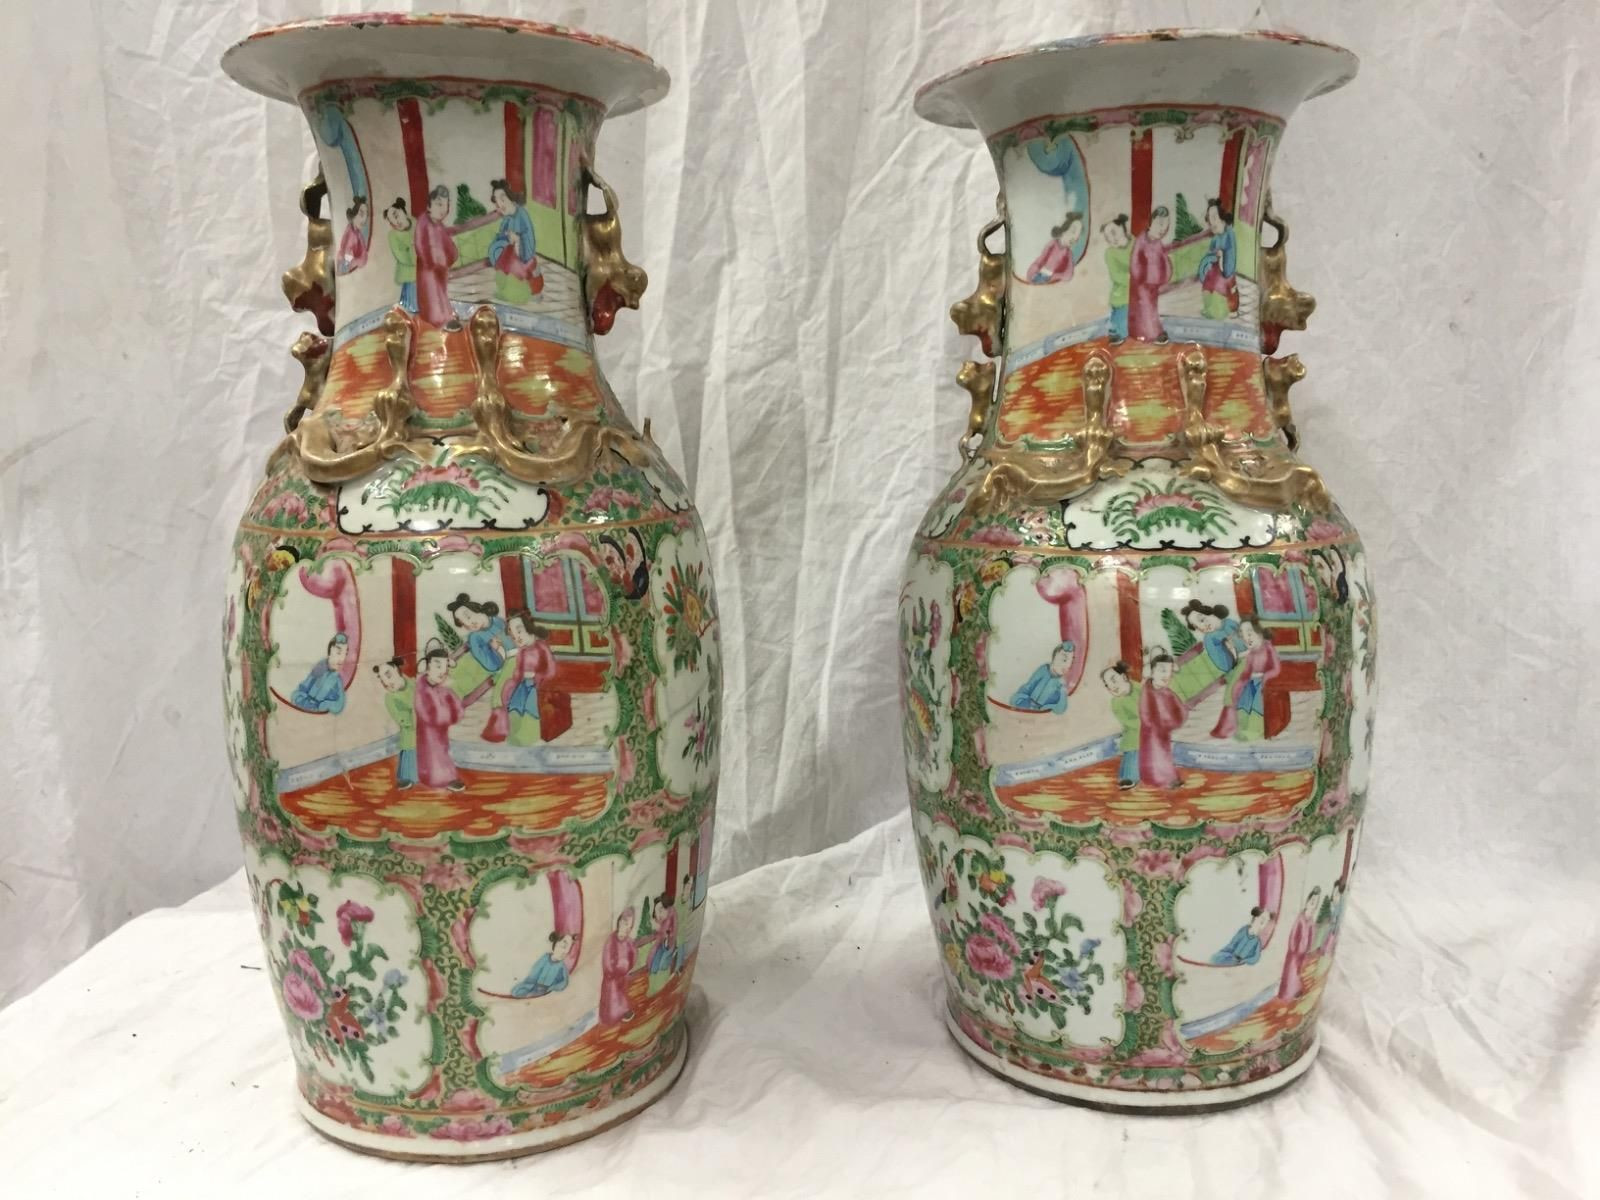 10 Fashionable Vintage Pink Ceramic Vase 2024 free download vintage pink ceramic vase of 22 large chinese vases for the floor the weekly world within 22 large chinese vases for the floor